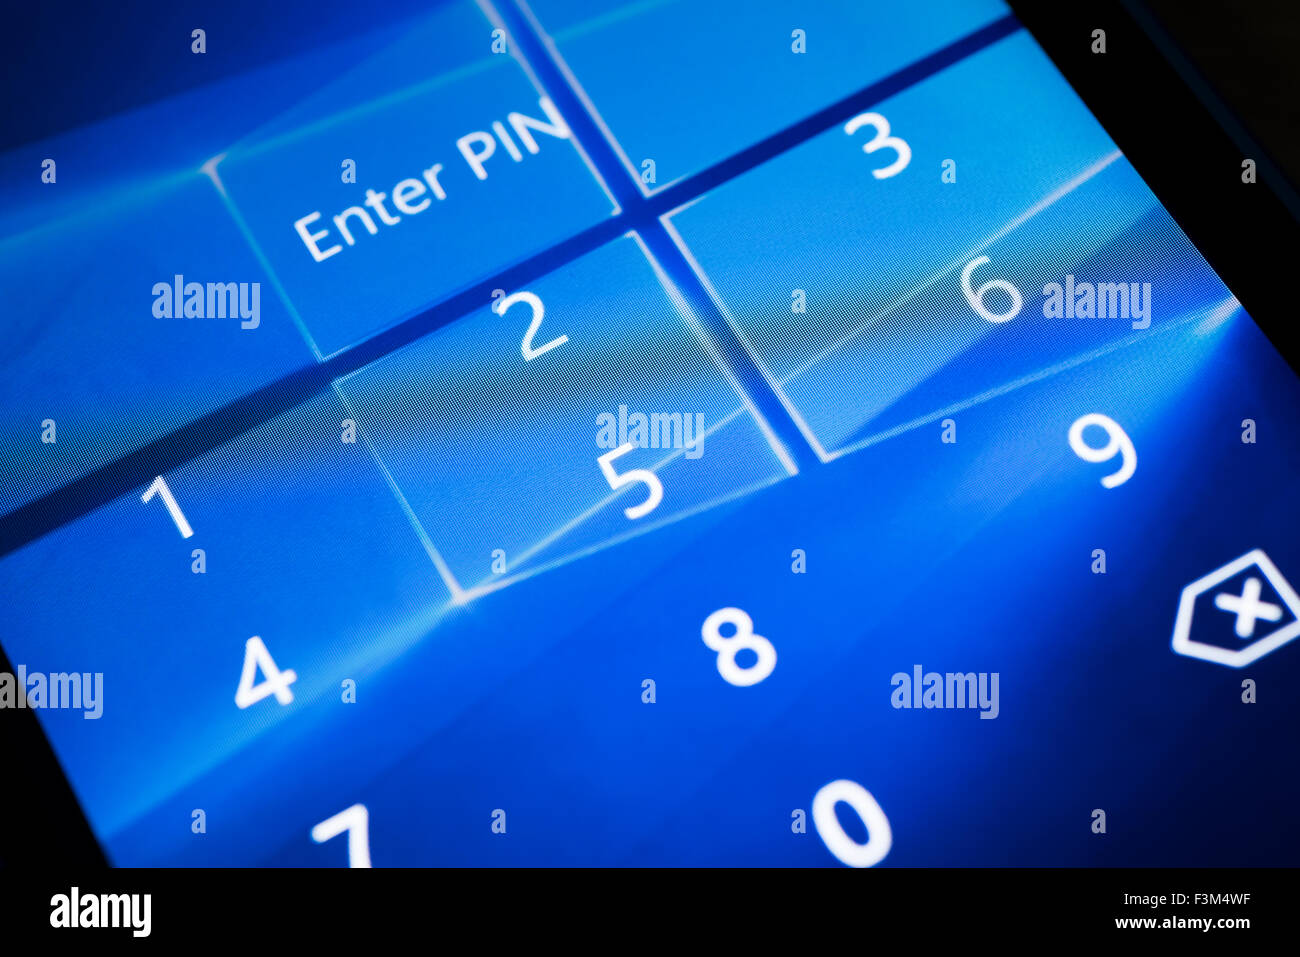 The pin number keypad to unlock a Windows 10 smartphone. Stock Photo